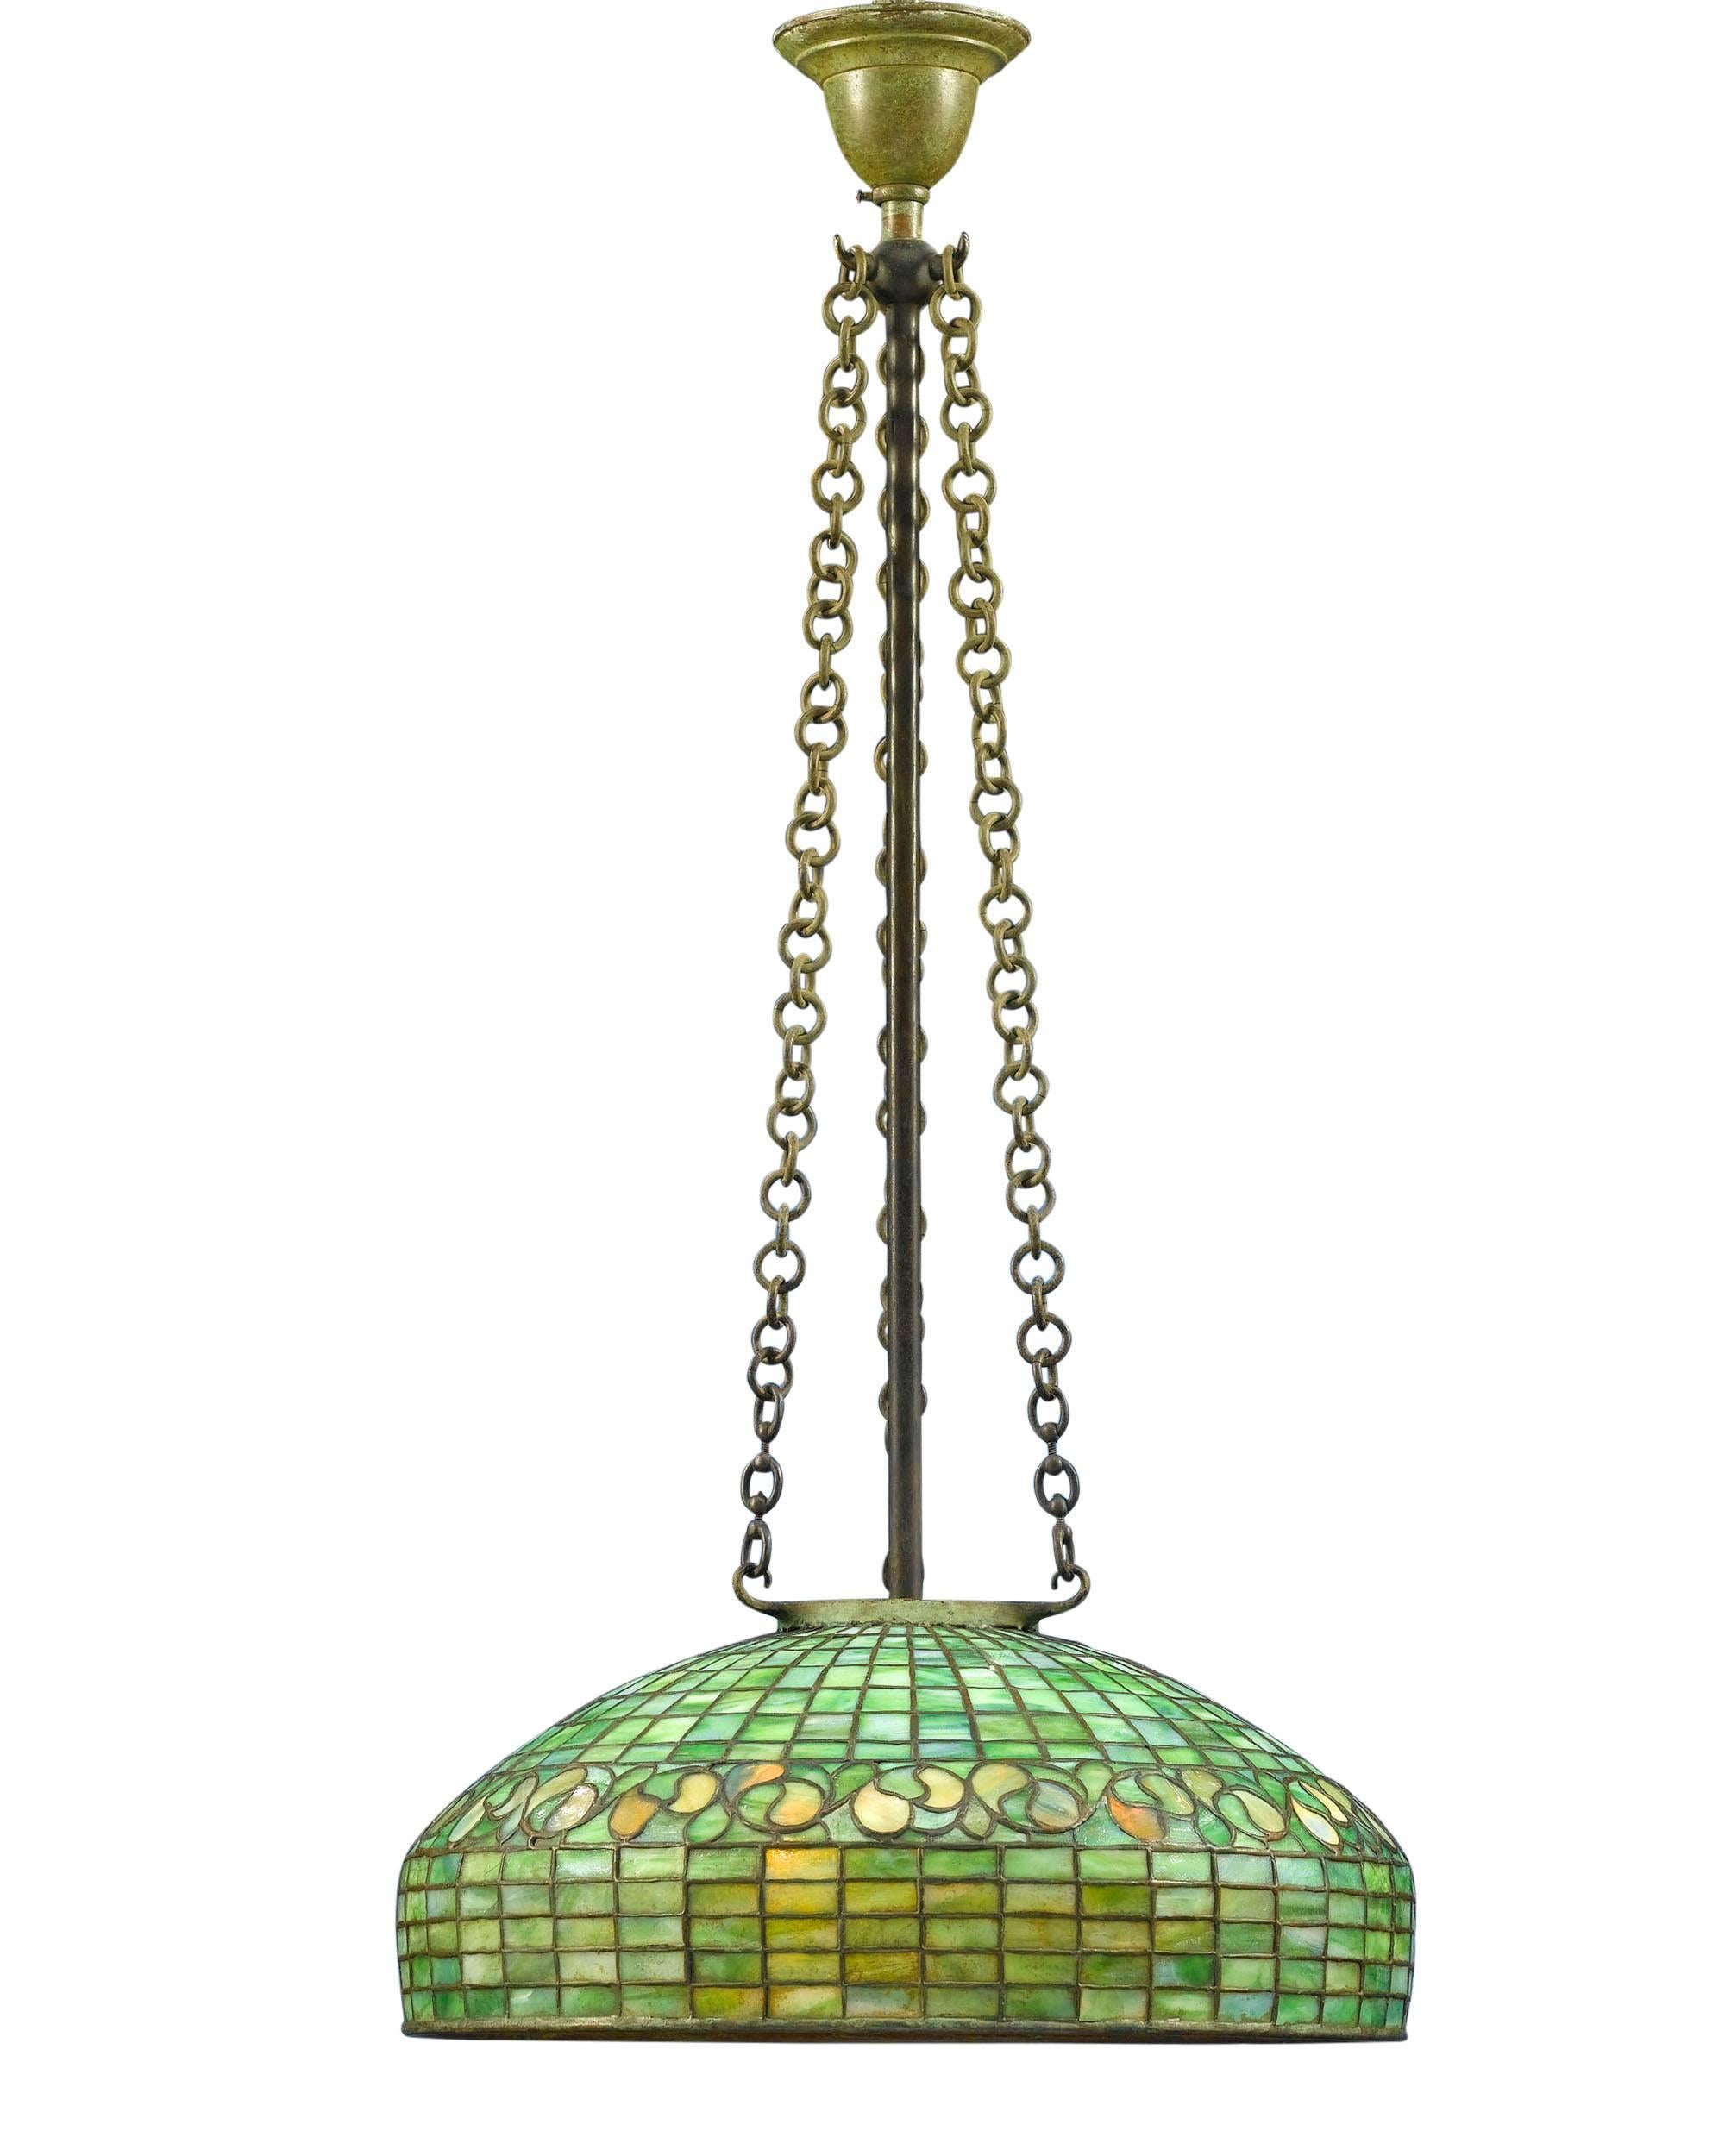 A beautiful Tiffany Studios hanging lamp in the Swirling Leaf pattern. This exceptional specimen is comprised of vivid green and golden yellow polychromatic glass arranged in what is considered to be one of the first patterns in Tiffany's